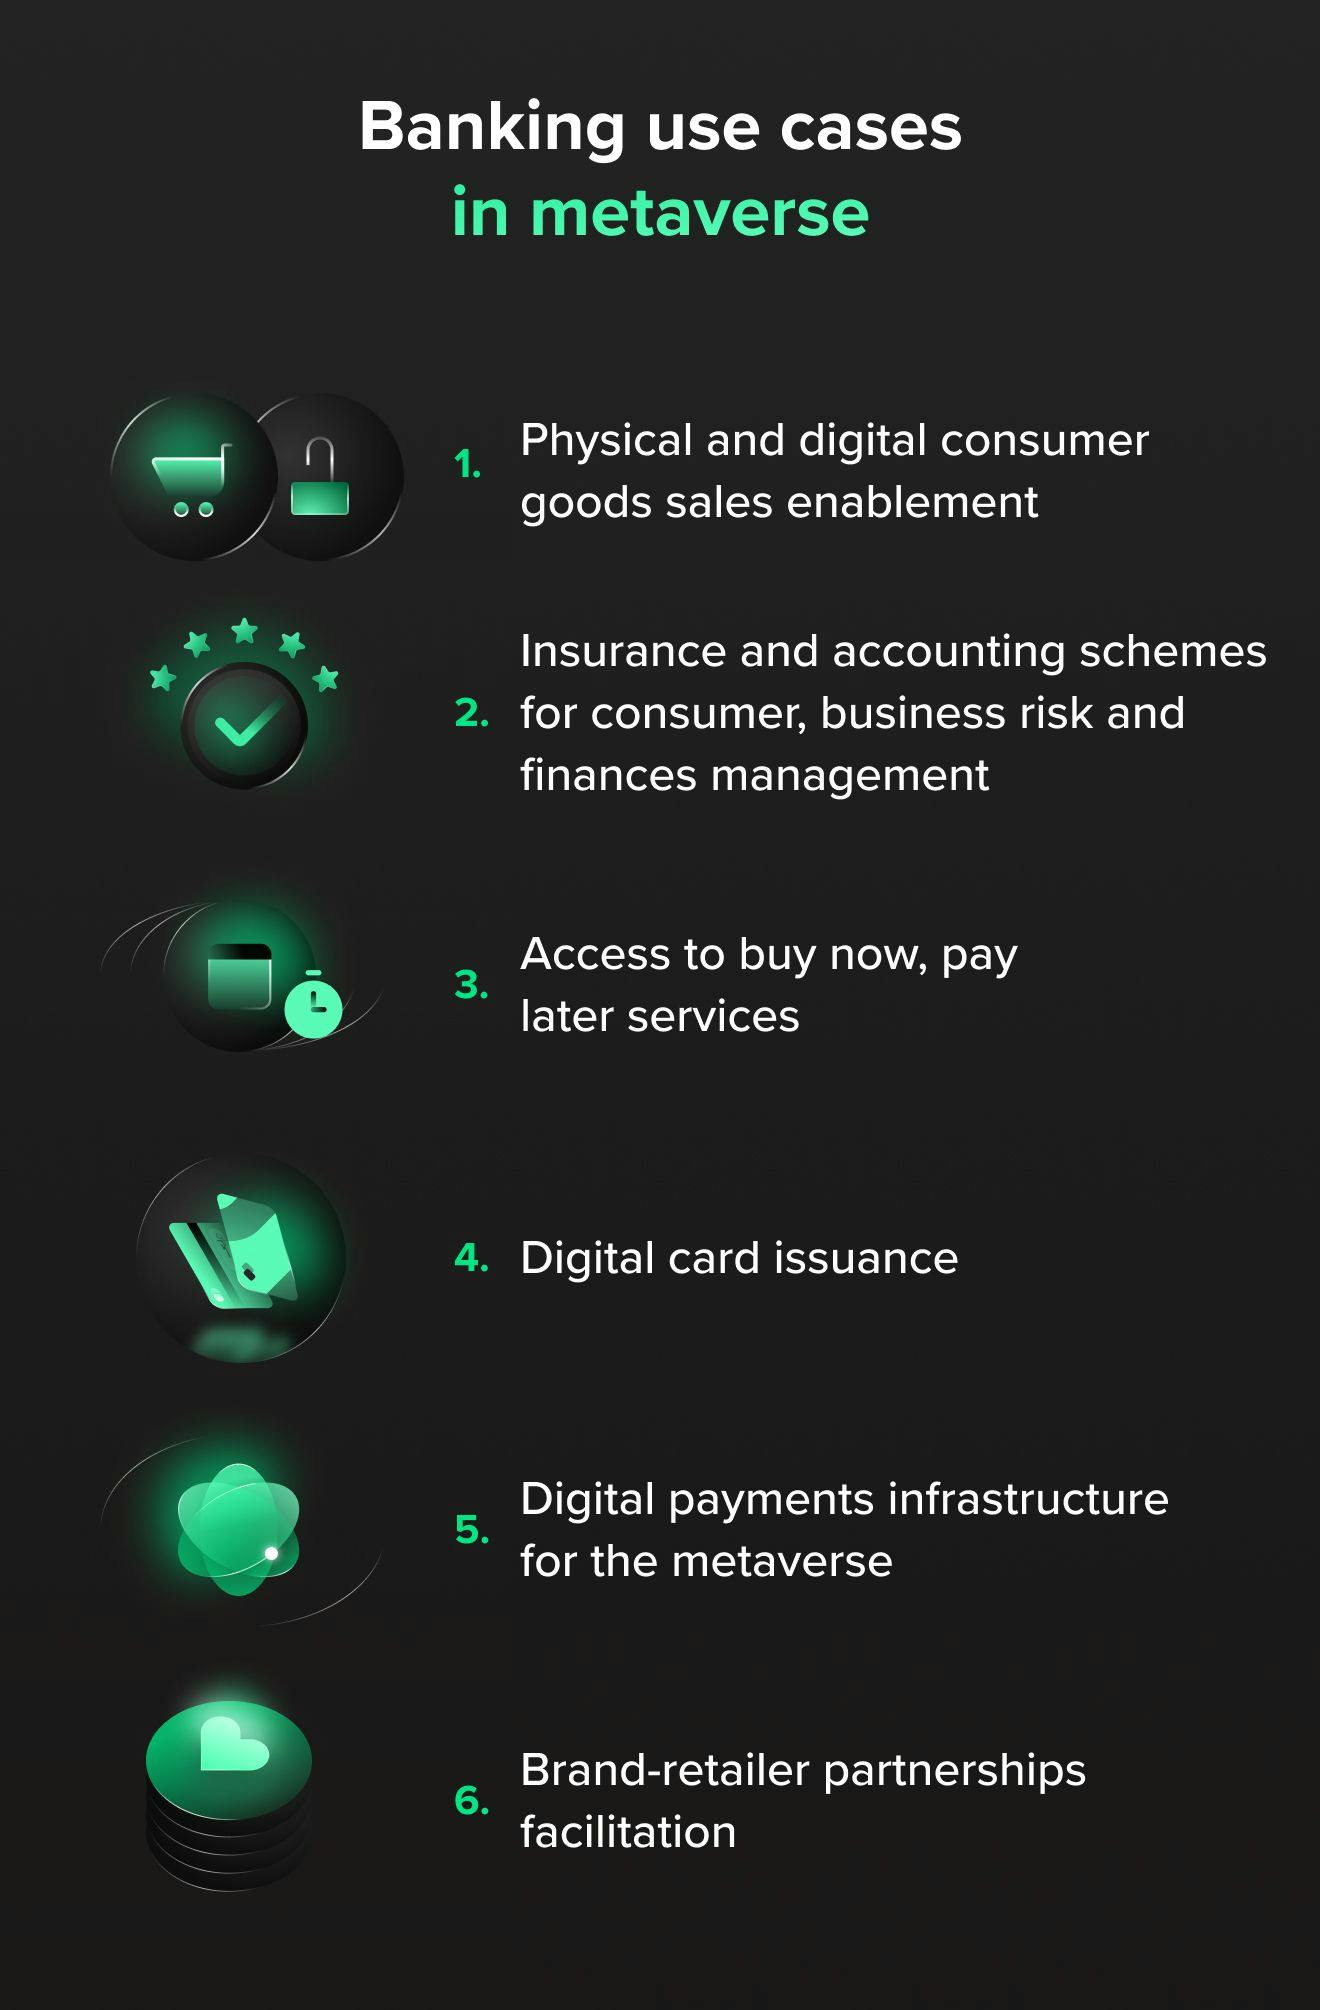 Banking use cases in metaverse